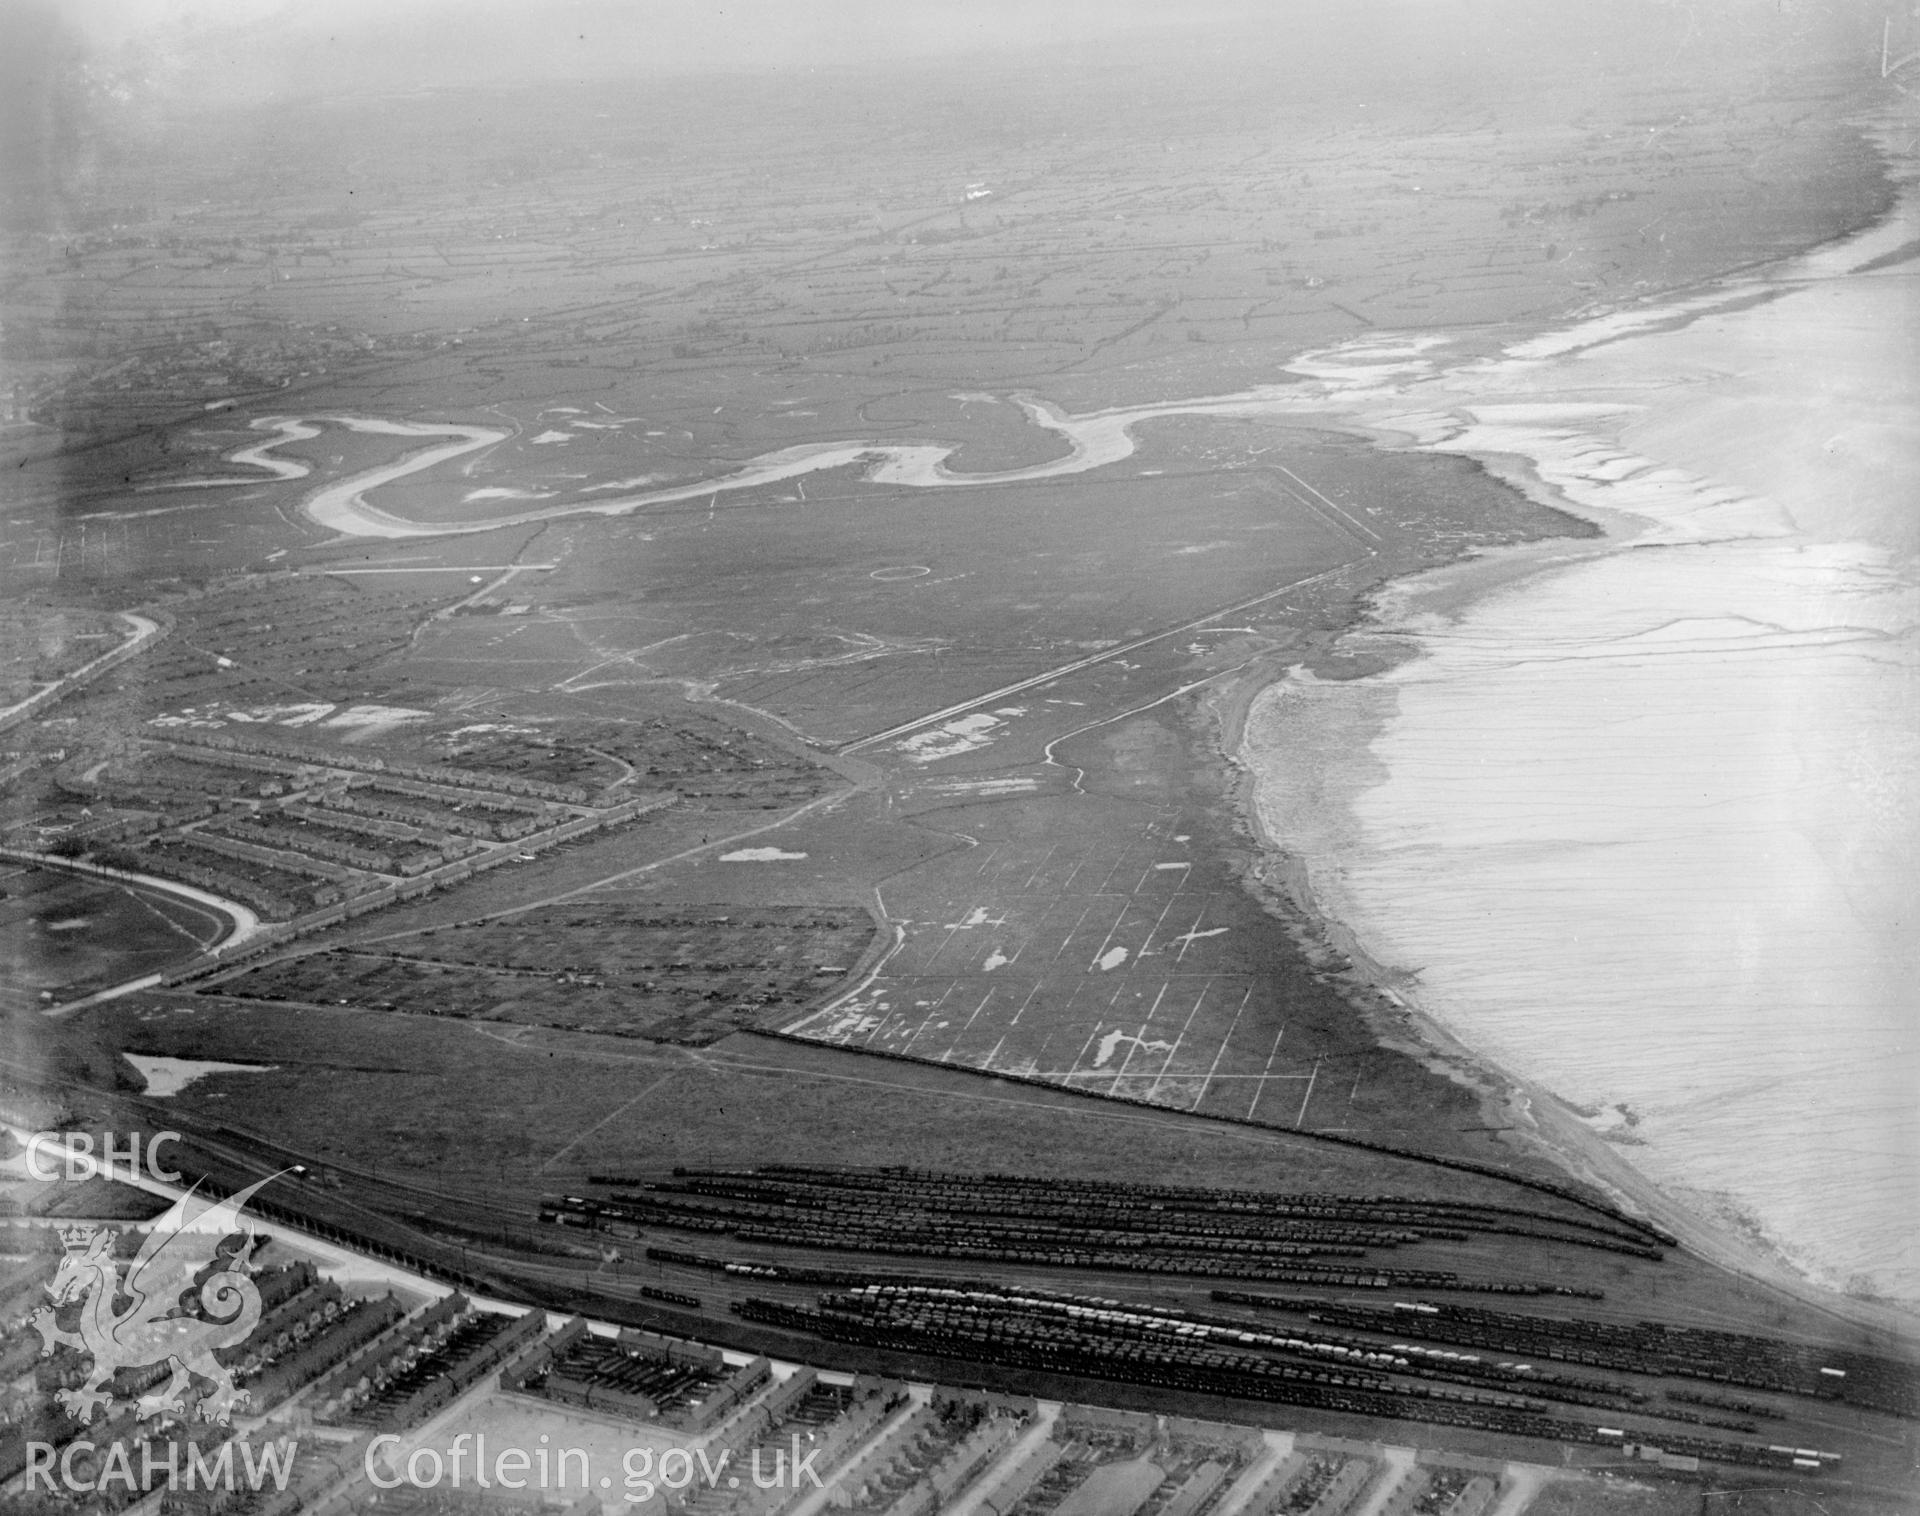 View of Cardiif airport, Splott, oblique aerial view. 5?x4? black and white glass plate negative.